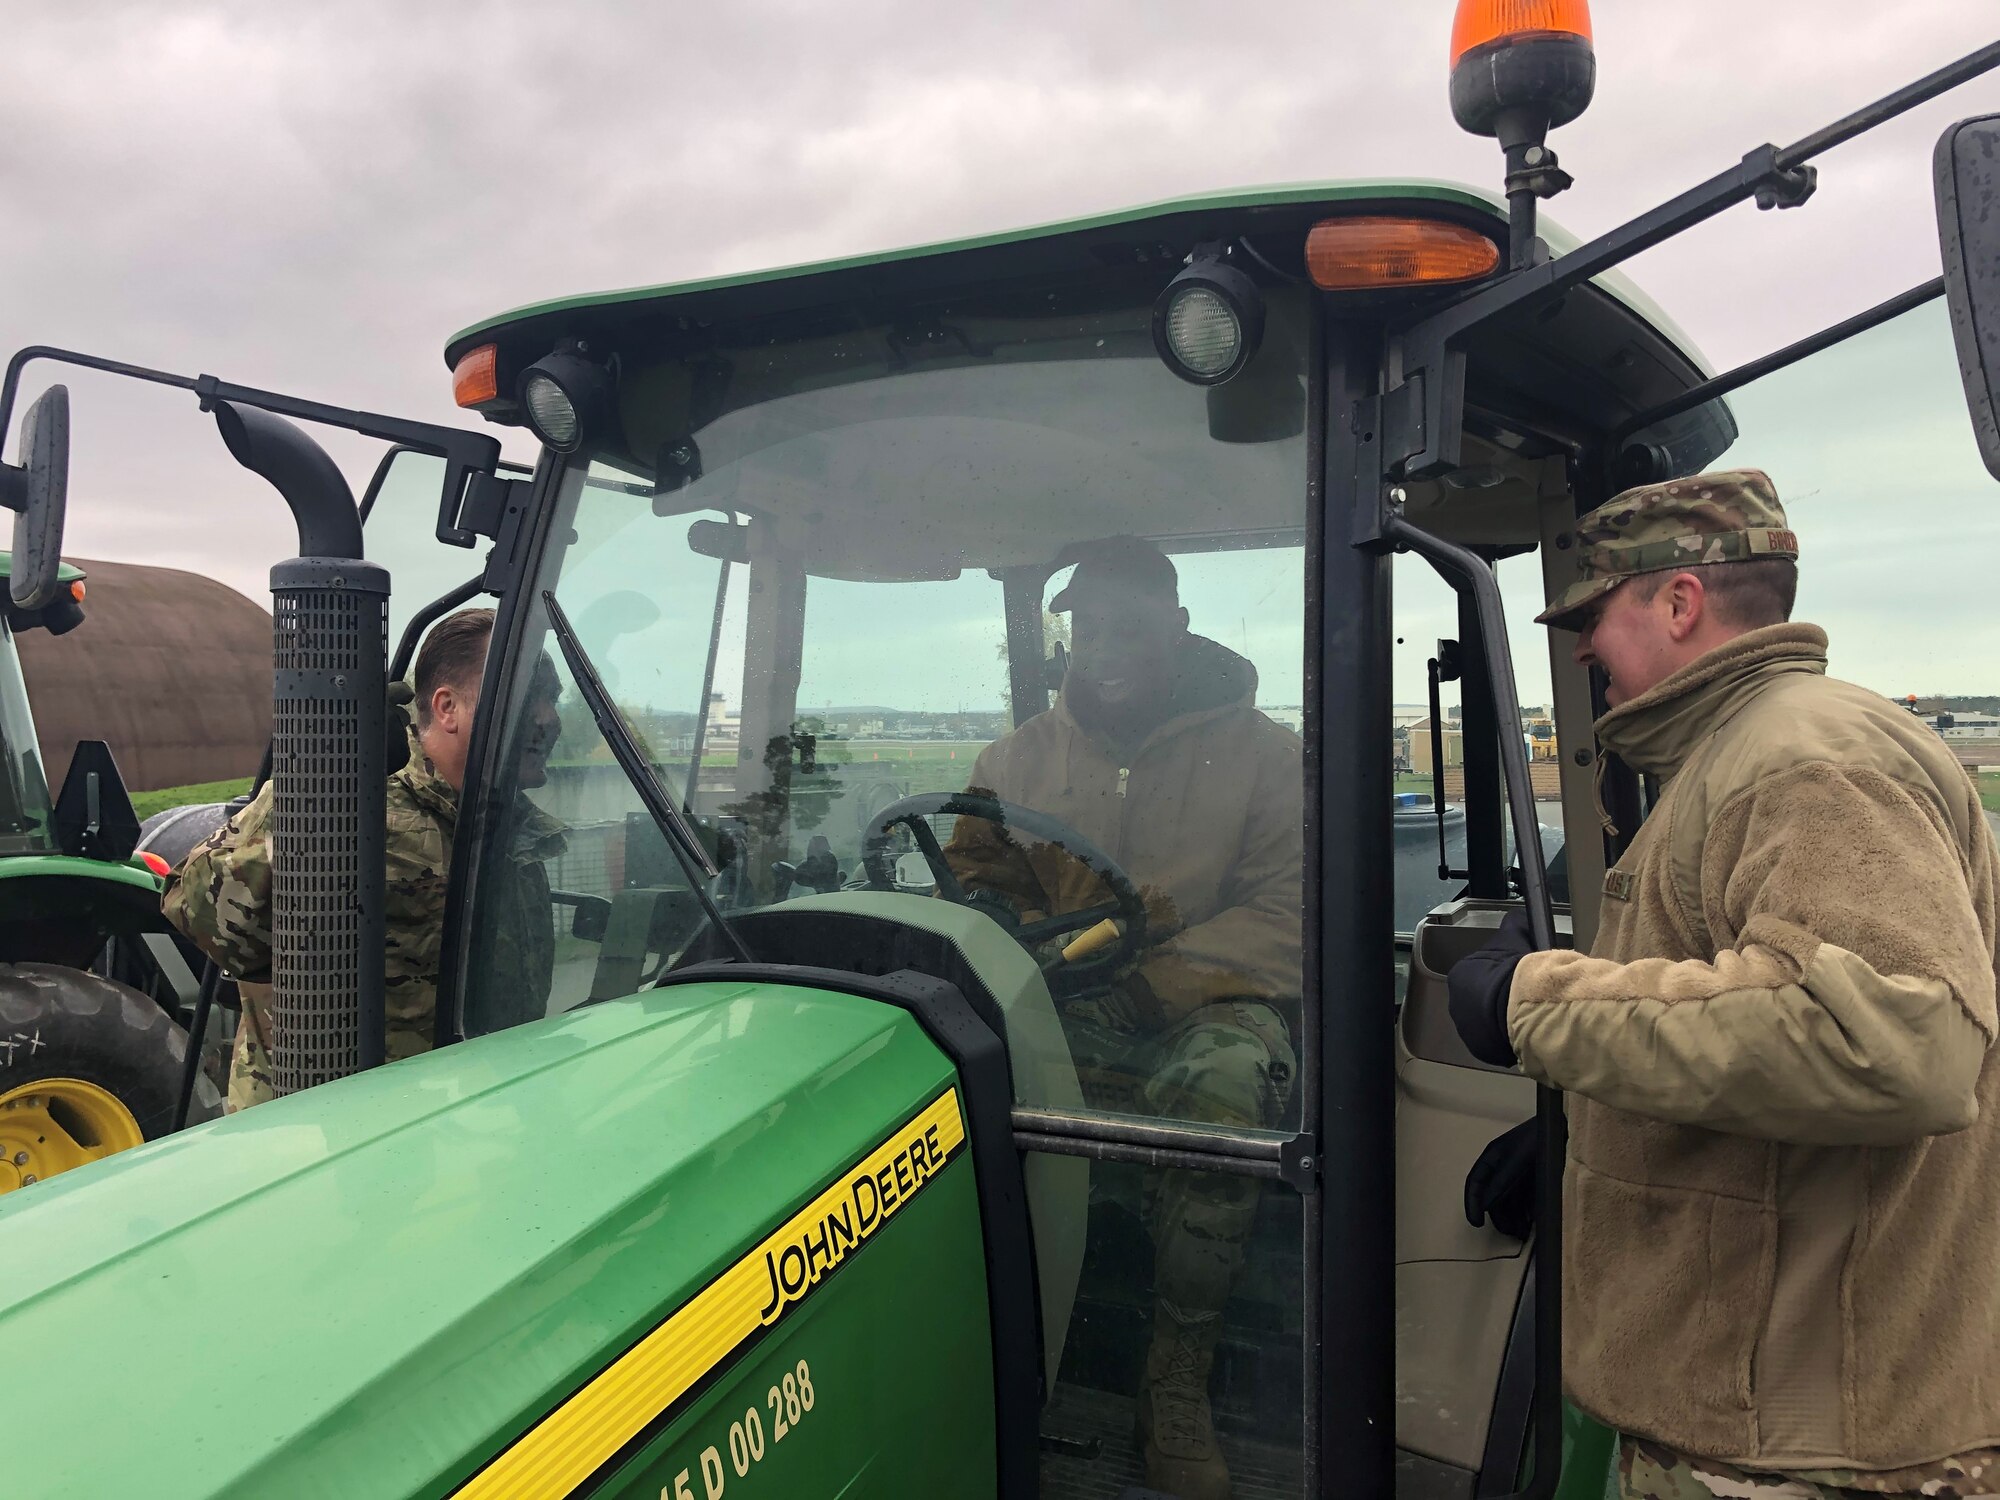 U.S. Air Force Tech. Sgt. Ernie T. Williams Jr, 435th Construction and Training Squadron electrical contingency instructor, shows Master Sgts. James Bindert and Daniel Williams from the 435th Contingency Response Support Squadron how to operate a John Deere tractor with kick broom attachment at Ramstein Air Base, Germany, Nov. 7, 2019. The John Deere with kick broom is used to remove foreign object debris during Rapid Airfield Damage Repair operations. (U.S. Air Force photo by Capt. Daniel McKeown)